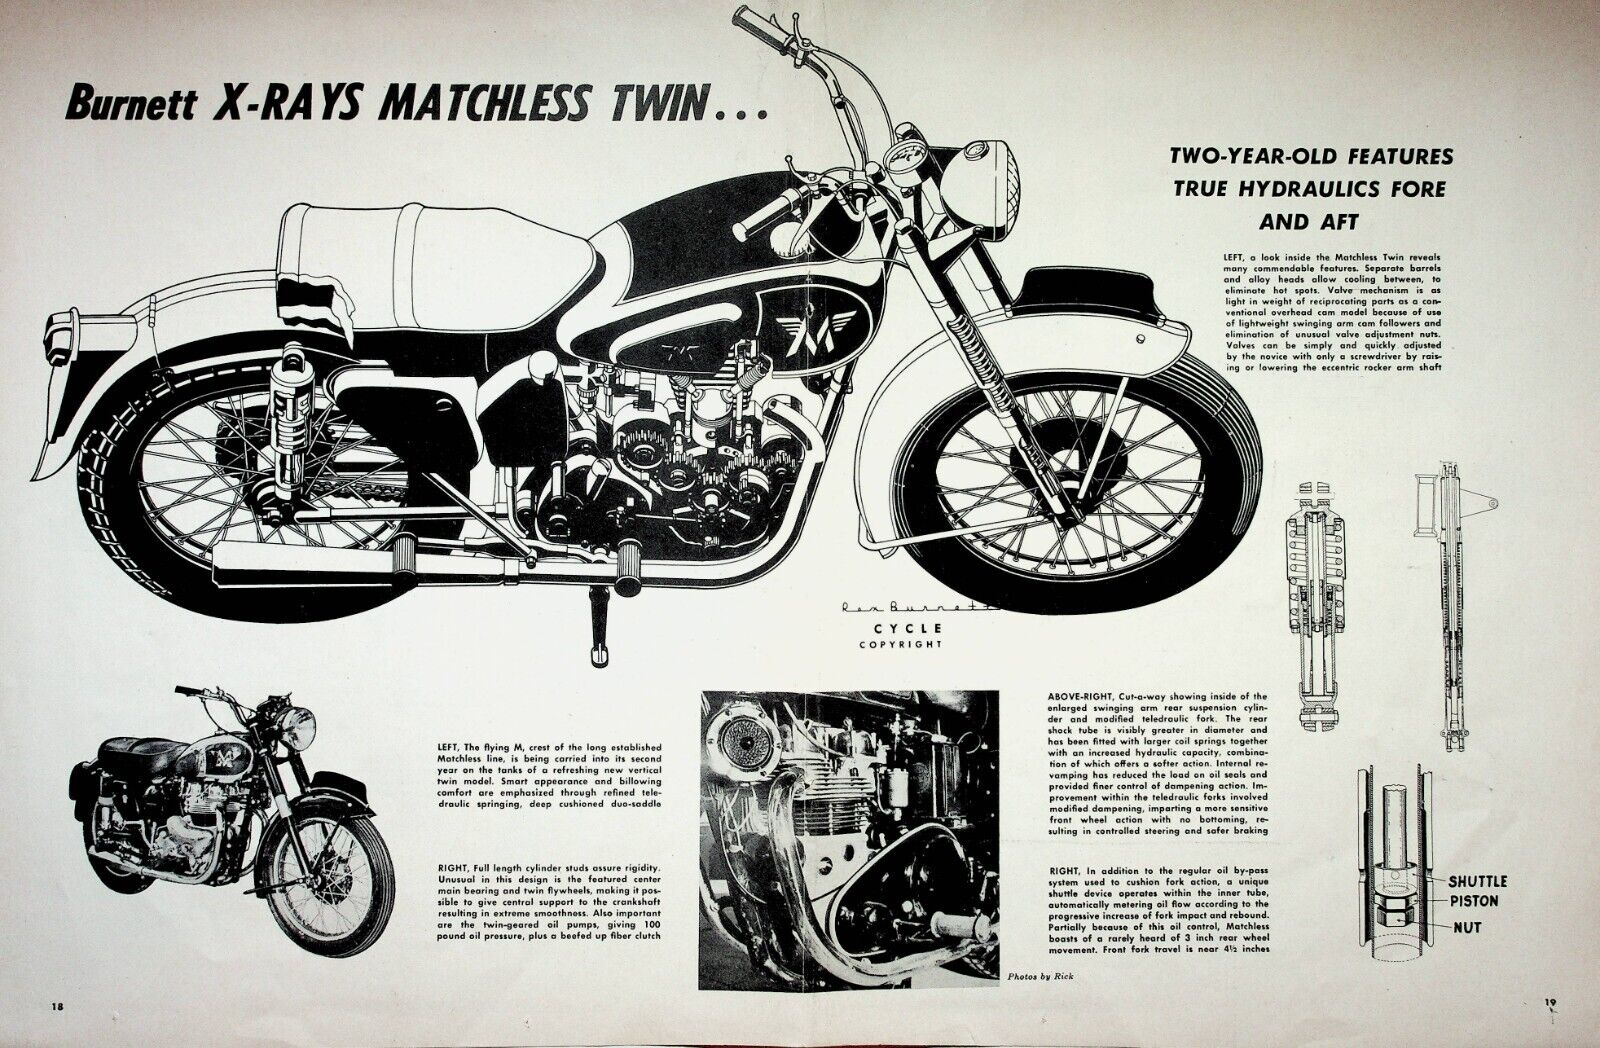 1951 Matchless Twin - 2-Page Vintage Motorcycle Ad